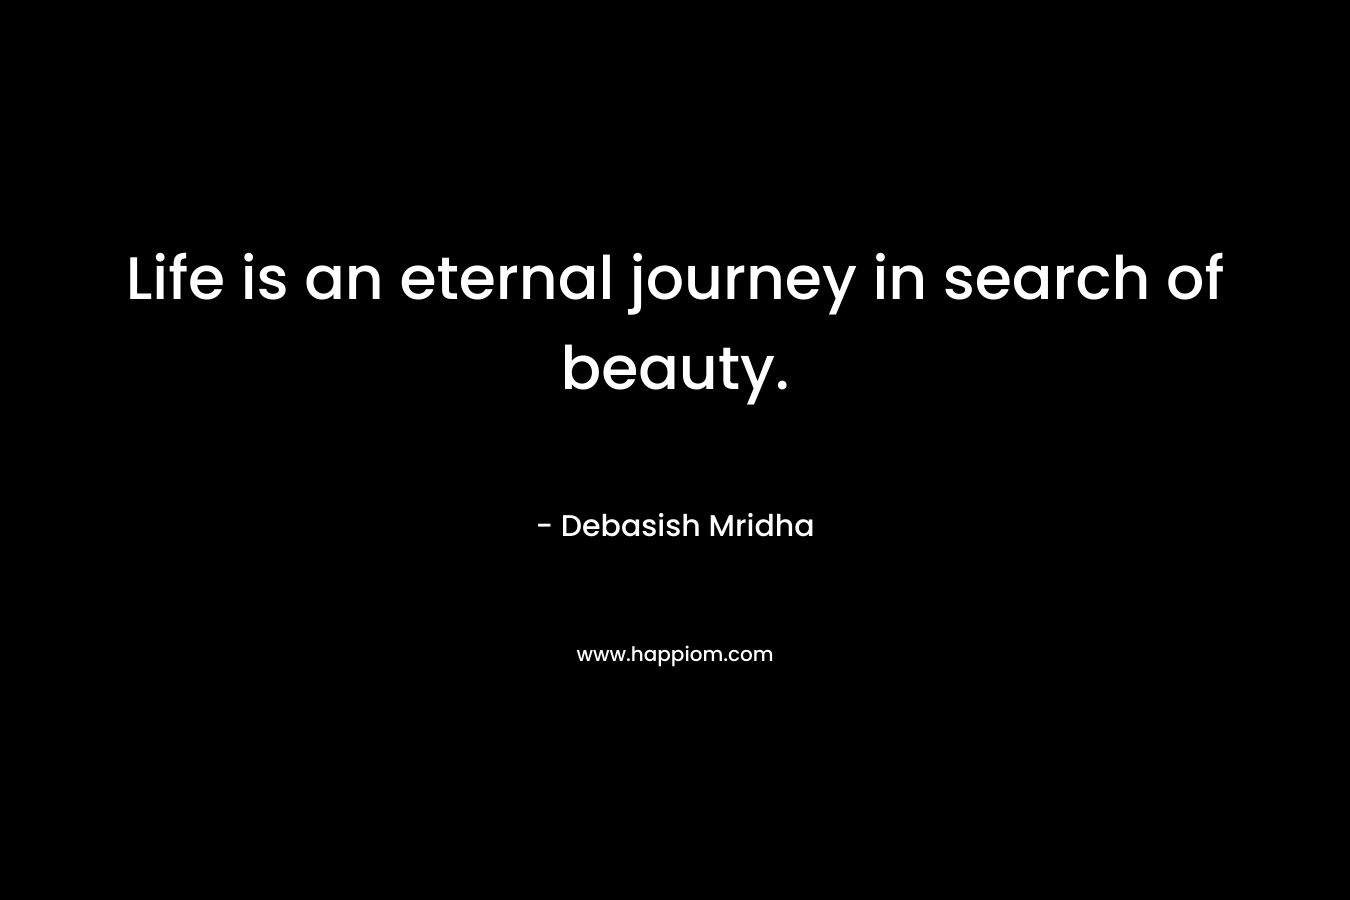 Life is an eternal journey in search of beauty.